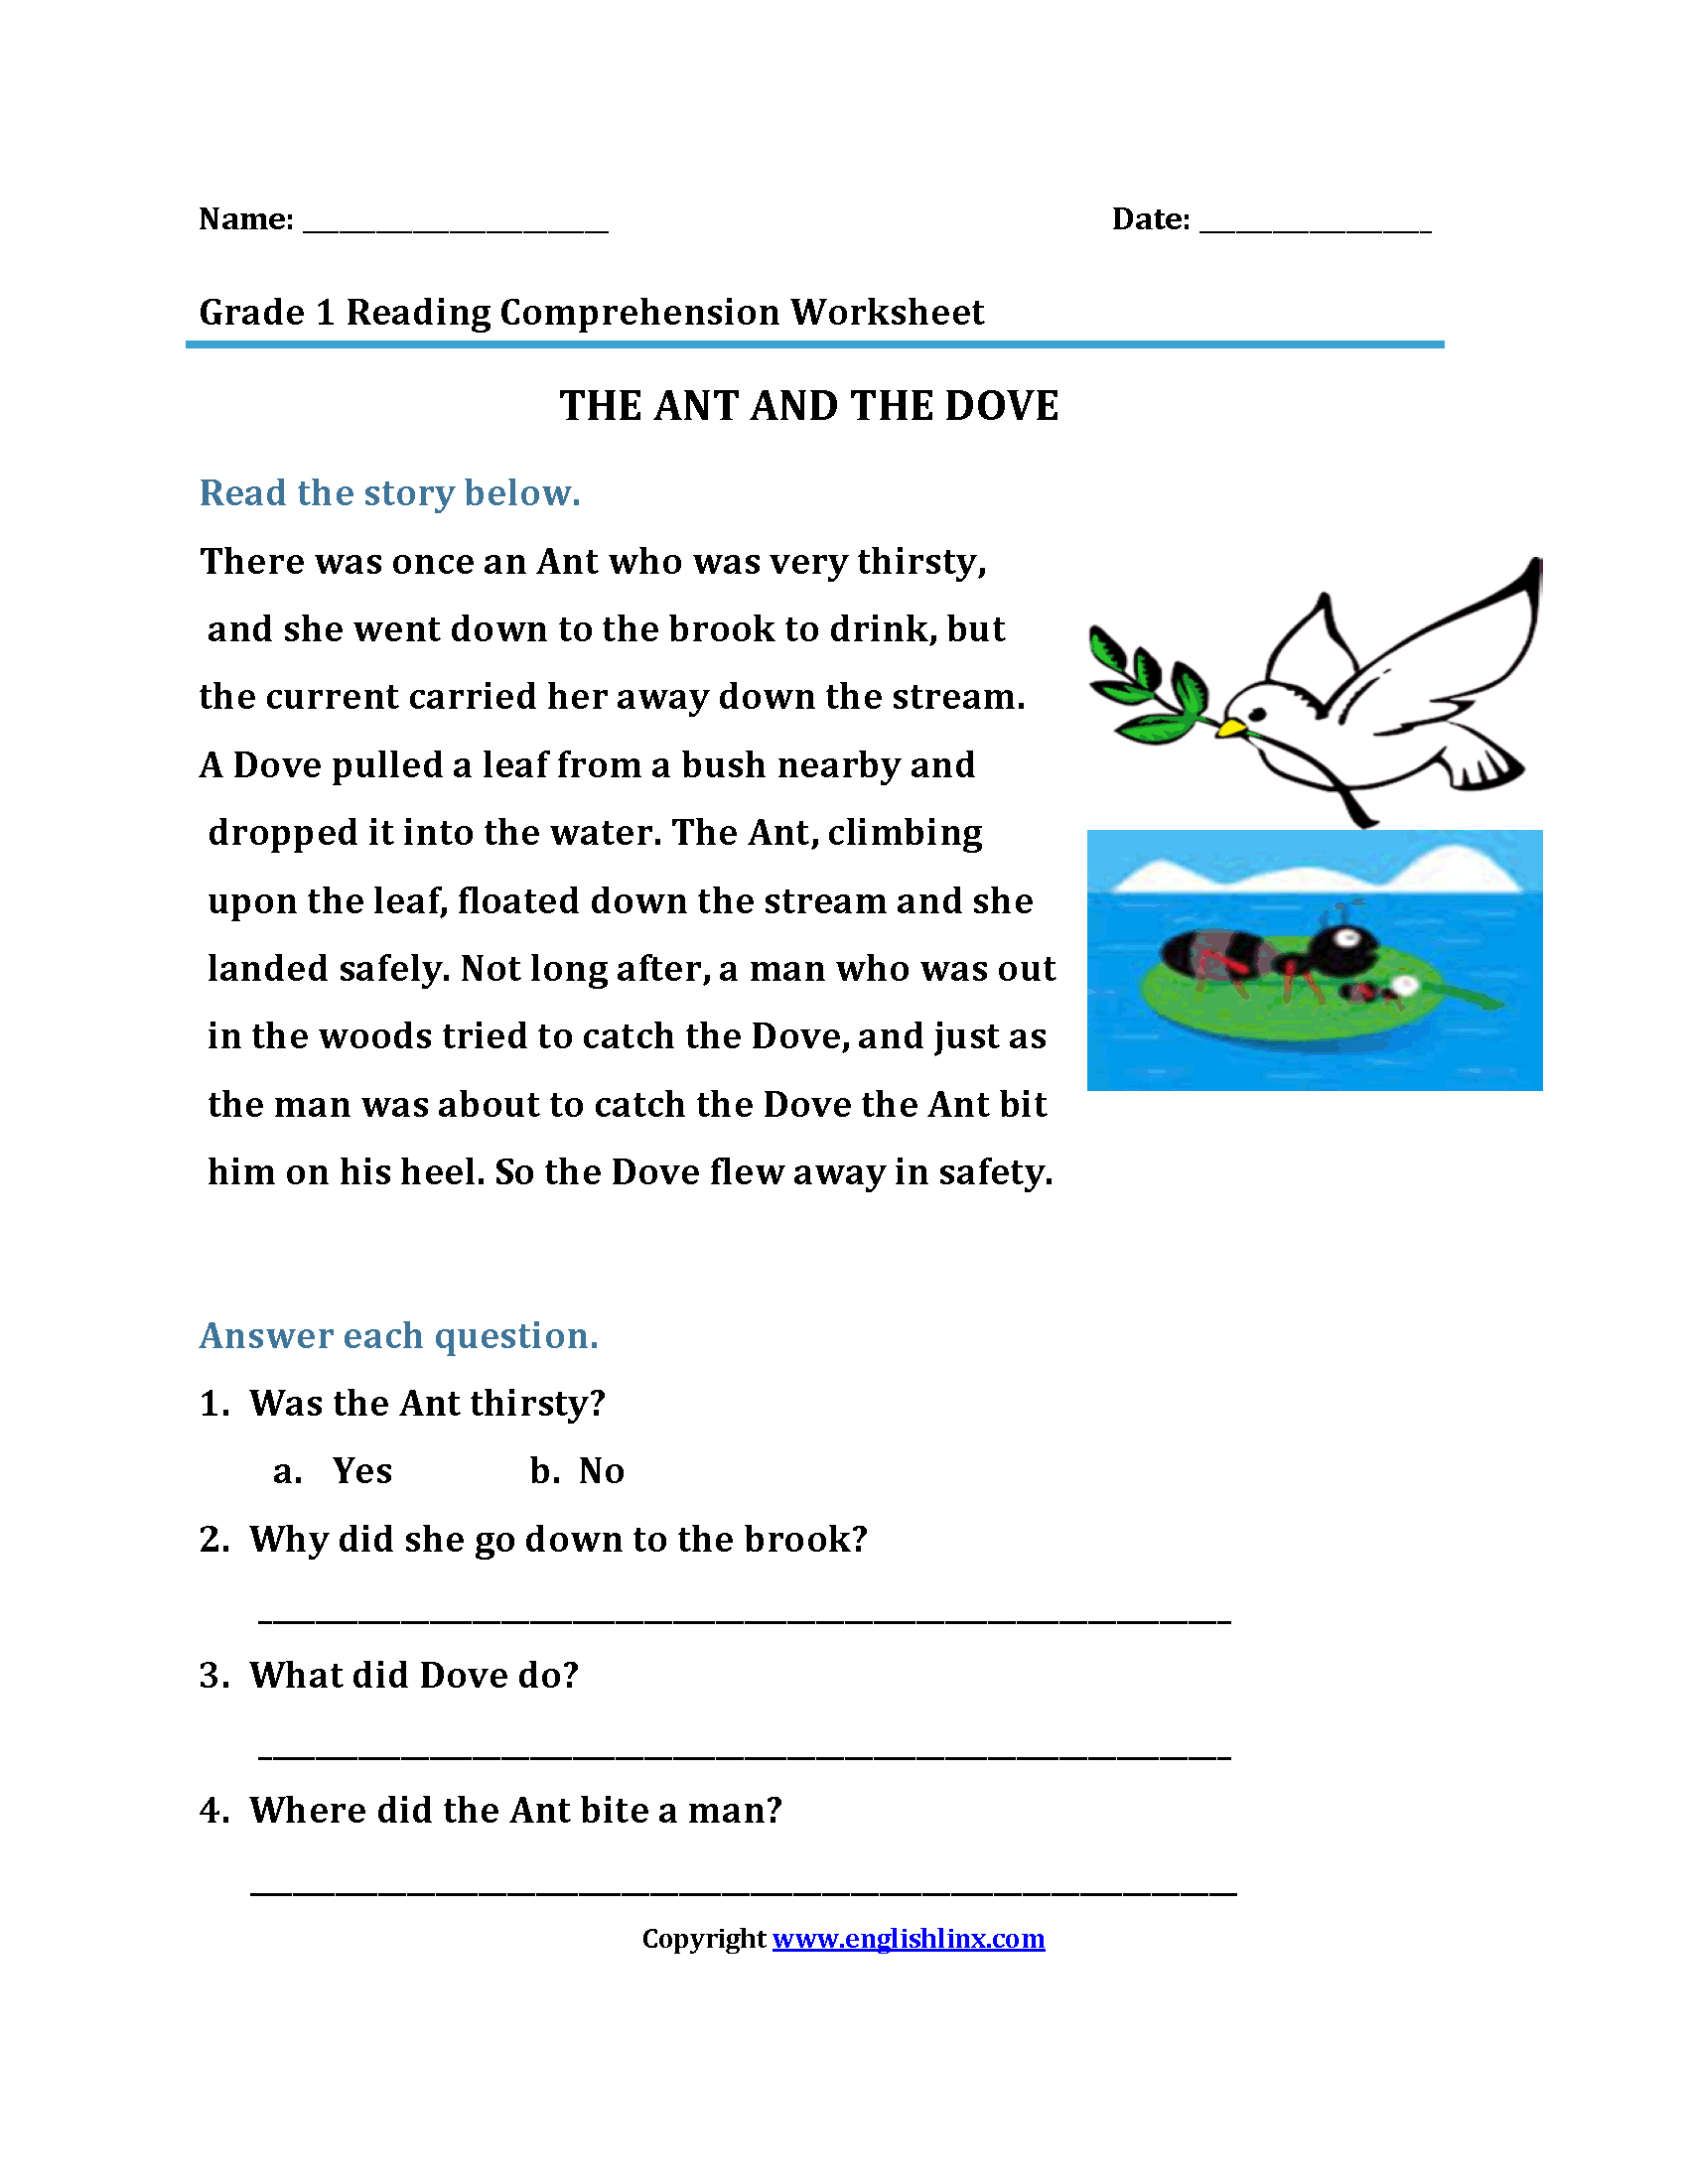 The Ant and Dove First Grade Reading Worksheets